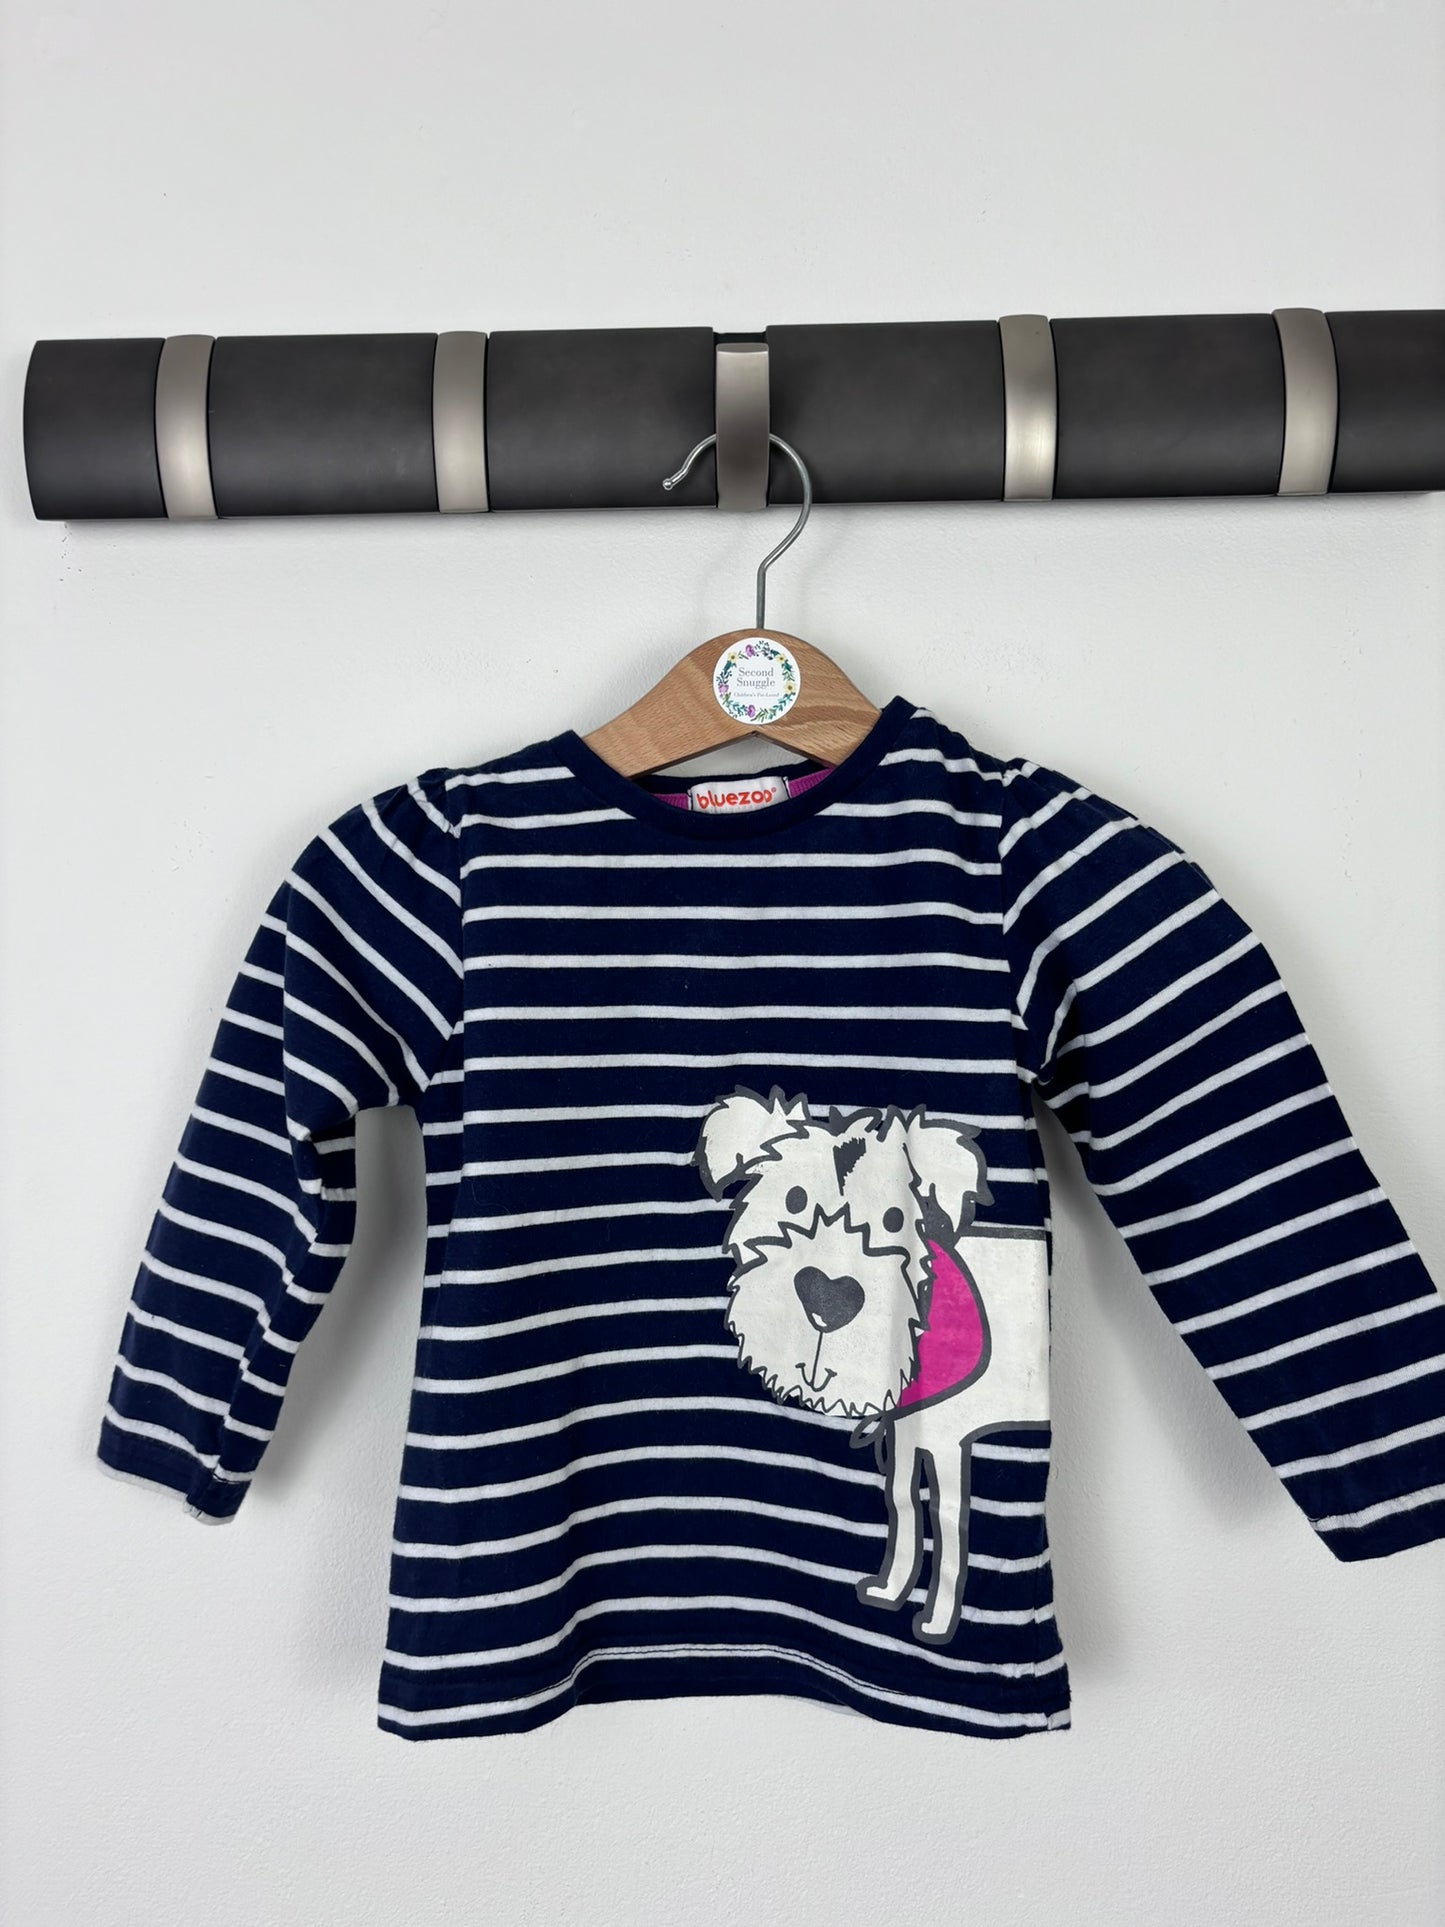 Blue Zoo 12-18 Months-Tops-Second Snuggle Preloved